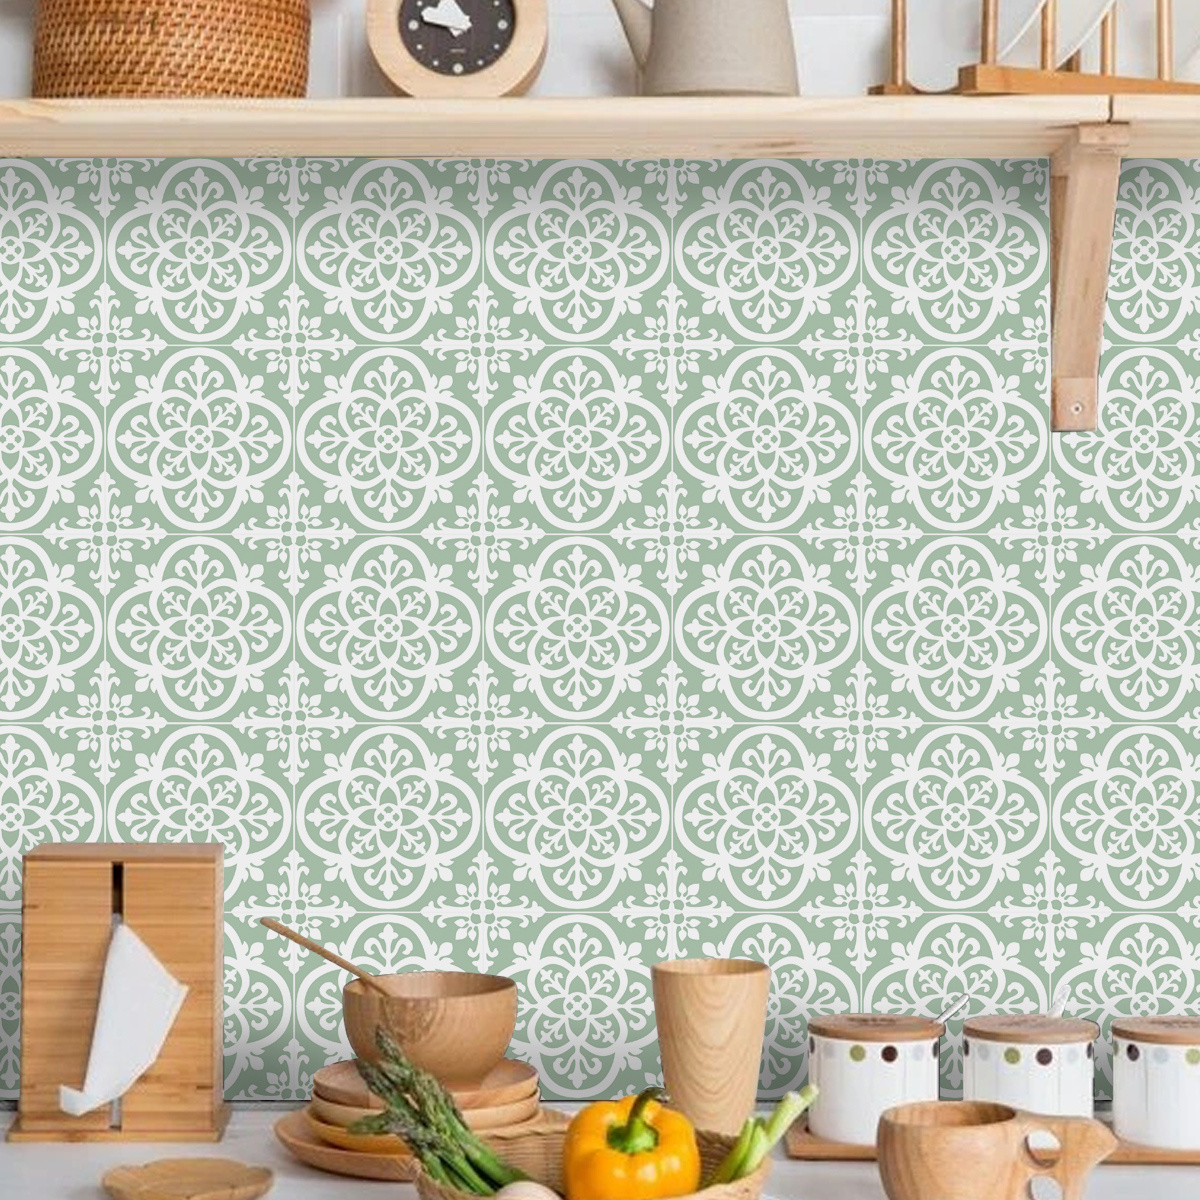 10pcs bohemian style kitchen tile stickers thickened waterproof self adhesive home decor wall stickers peel and stick stickers for kitchen backsplash diy mural decals details 6